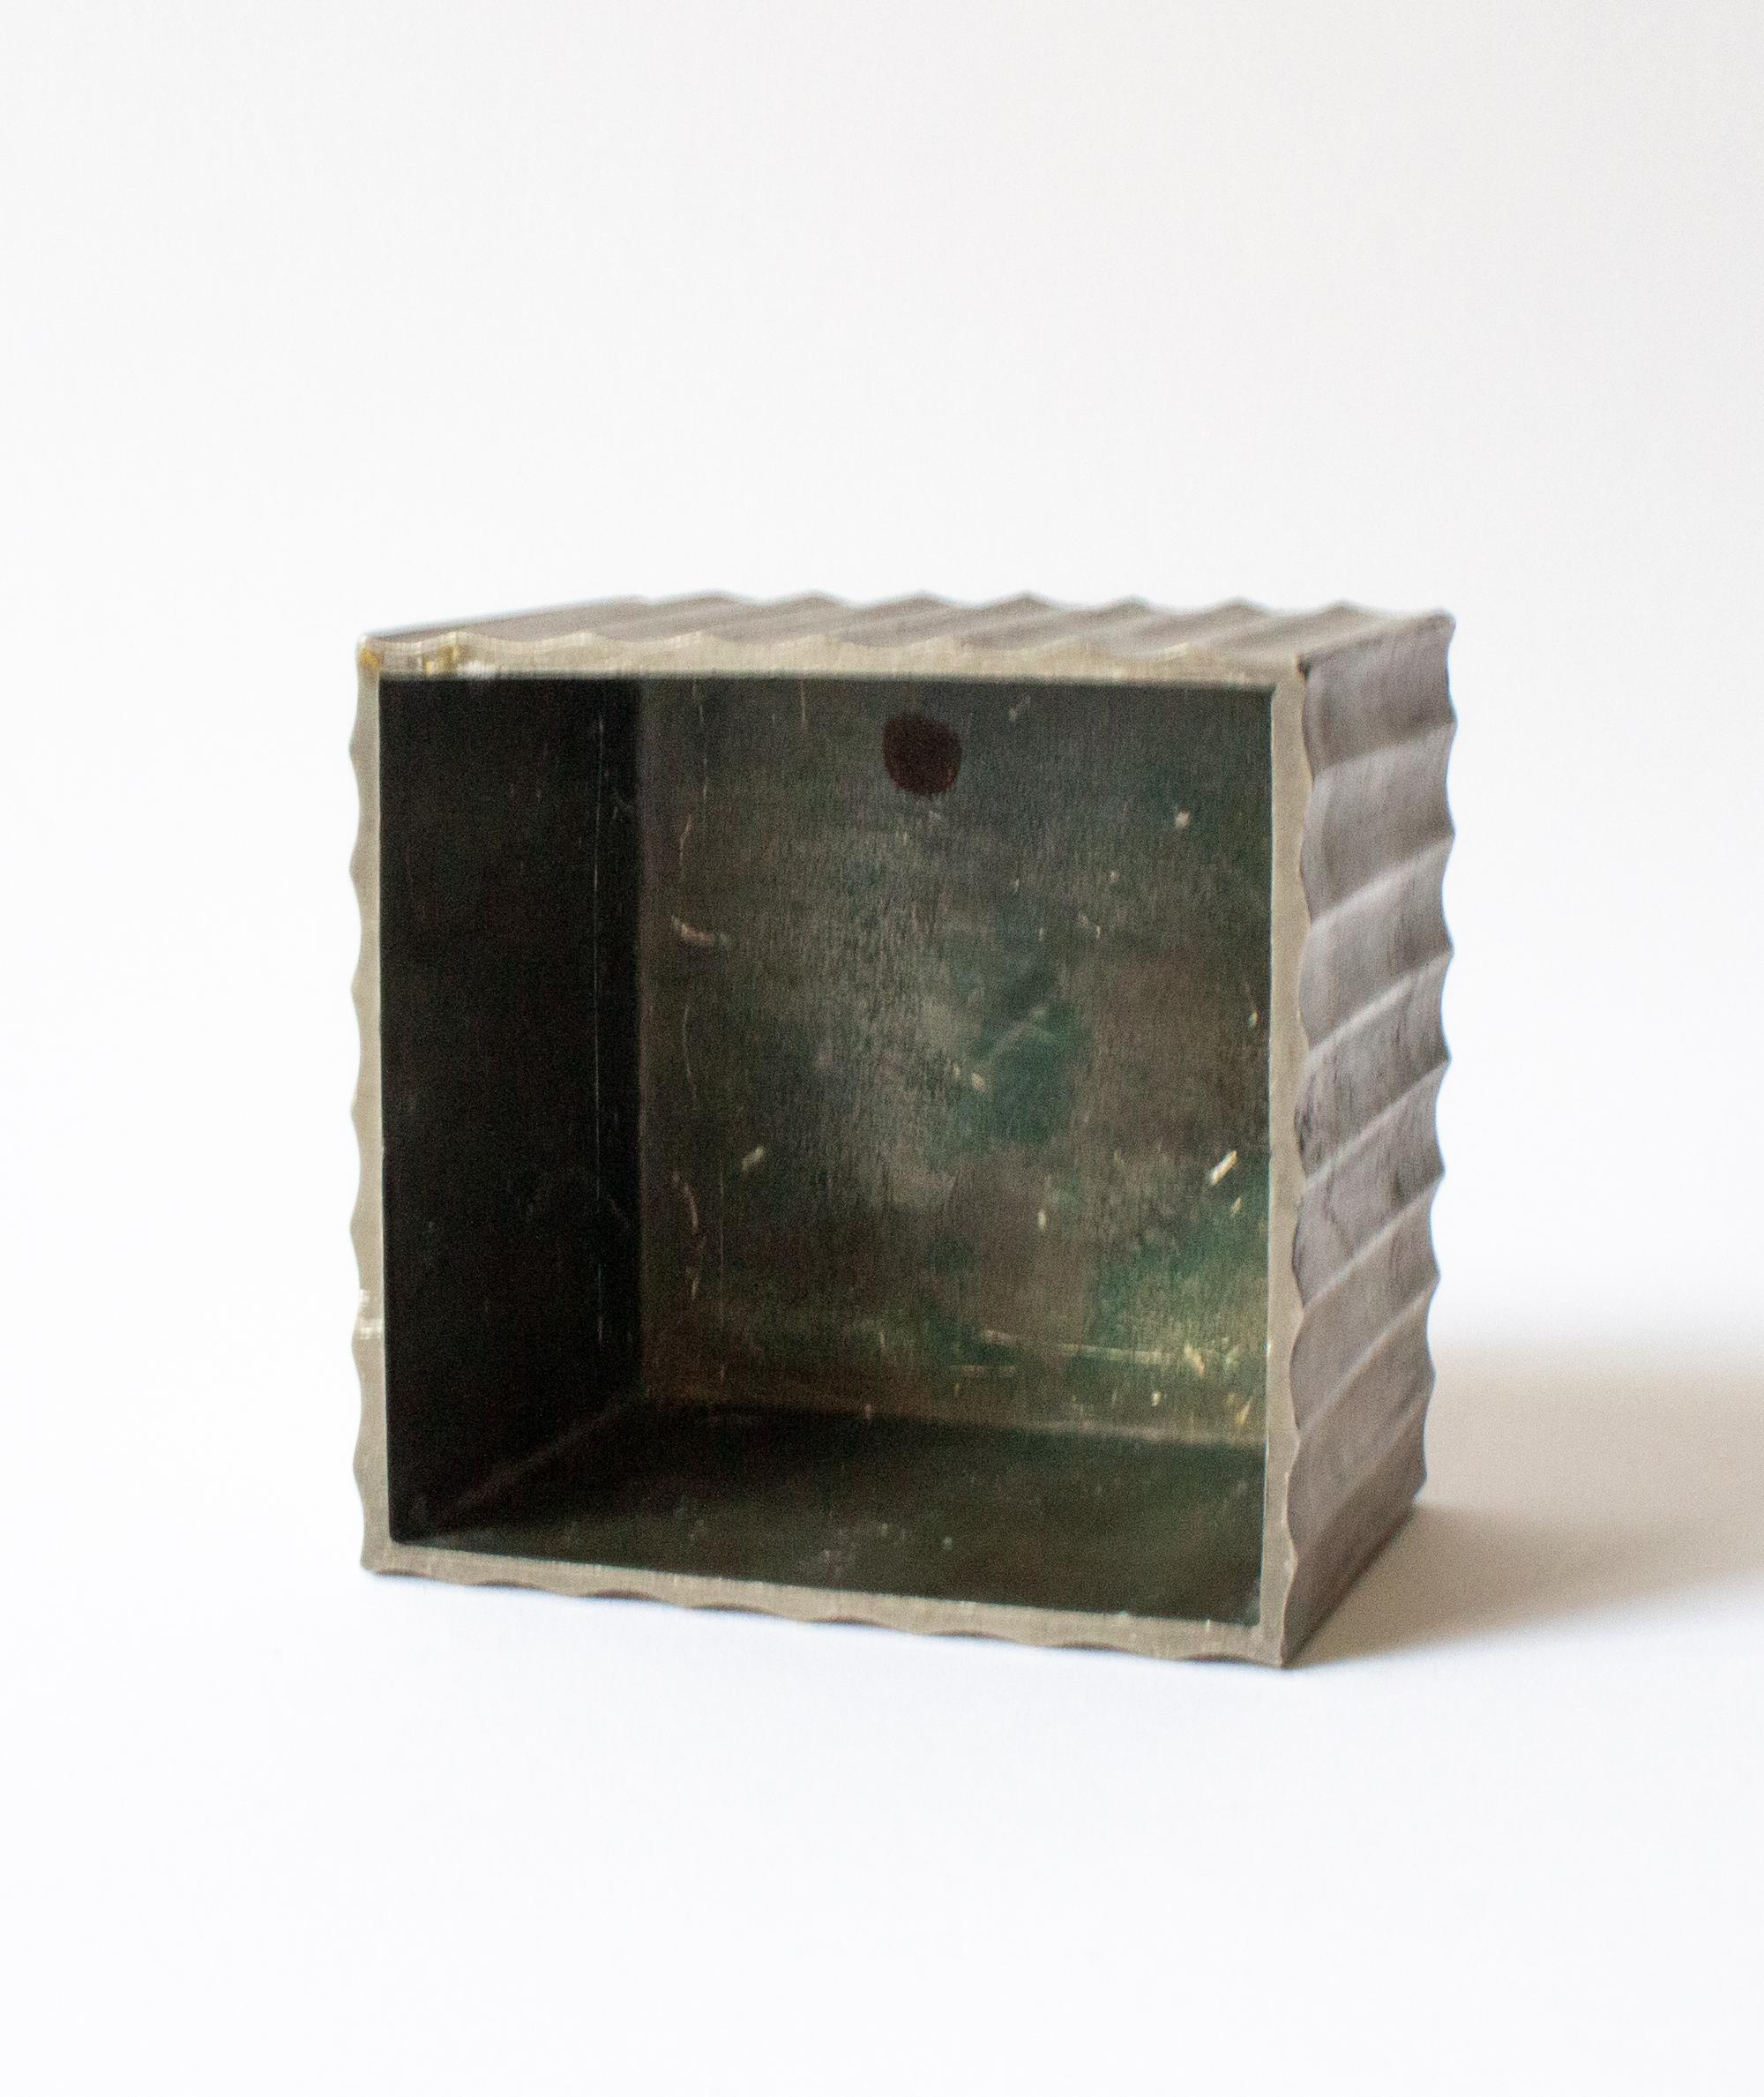 Hand-Crafted Swedish Grace Pewter Box by Ingvar Bossler for Gamleby Tenn, Västervik, Sweden. For Sale